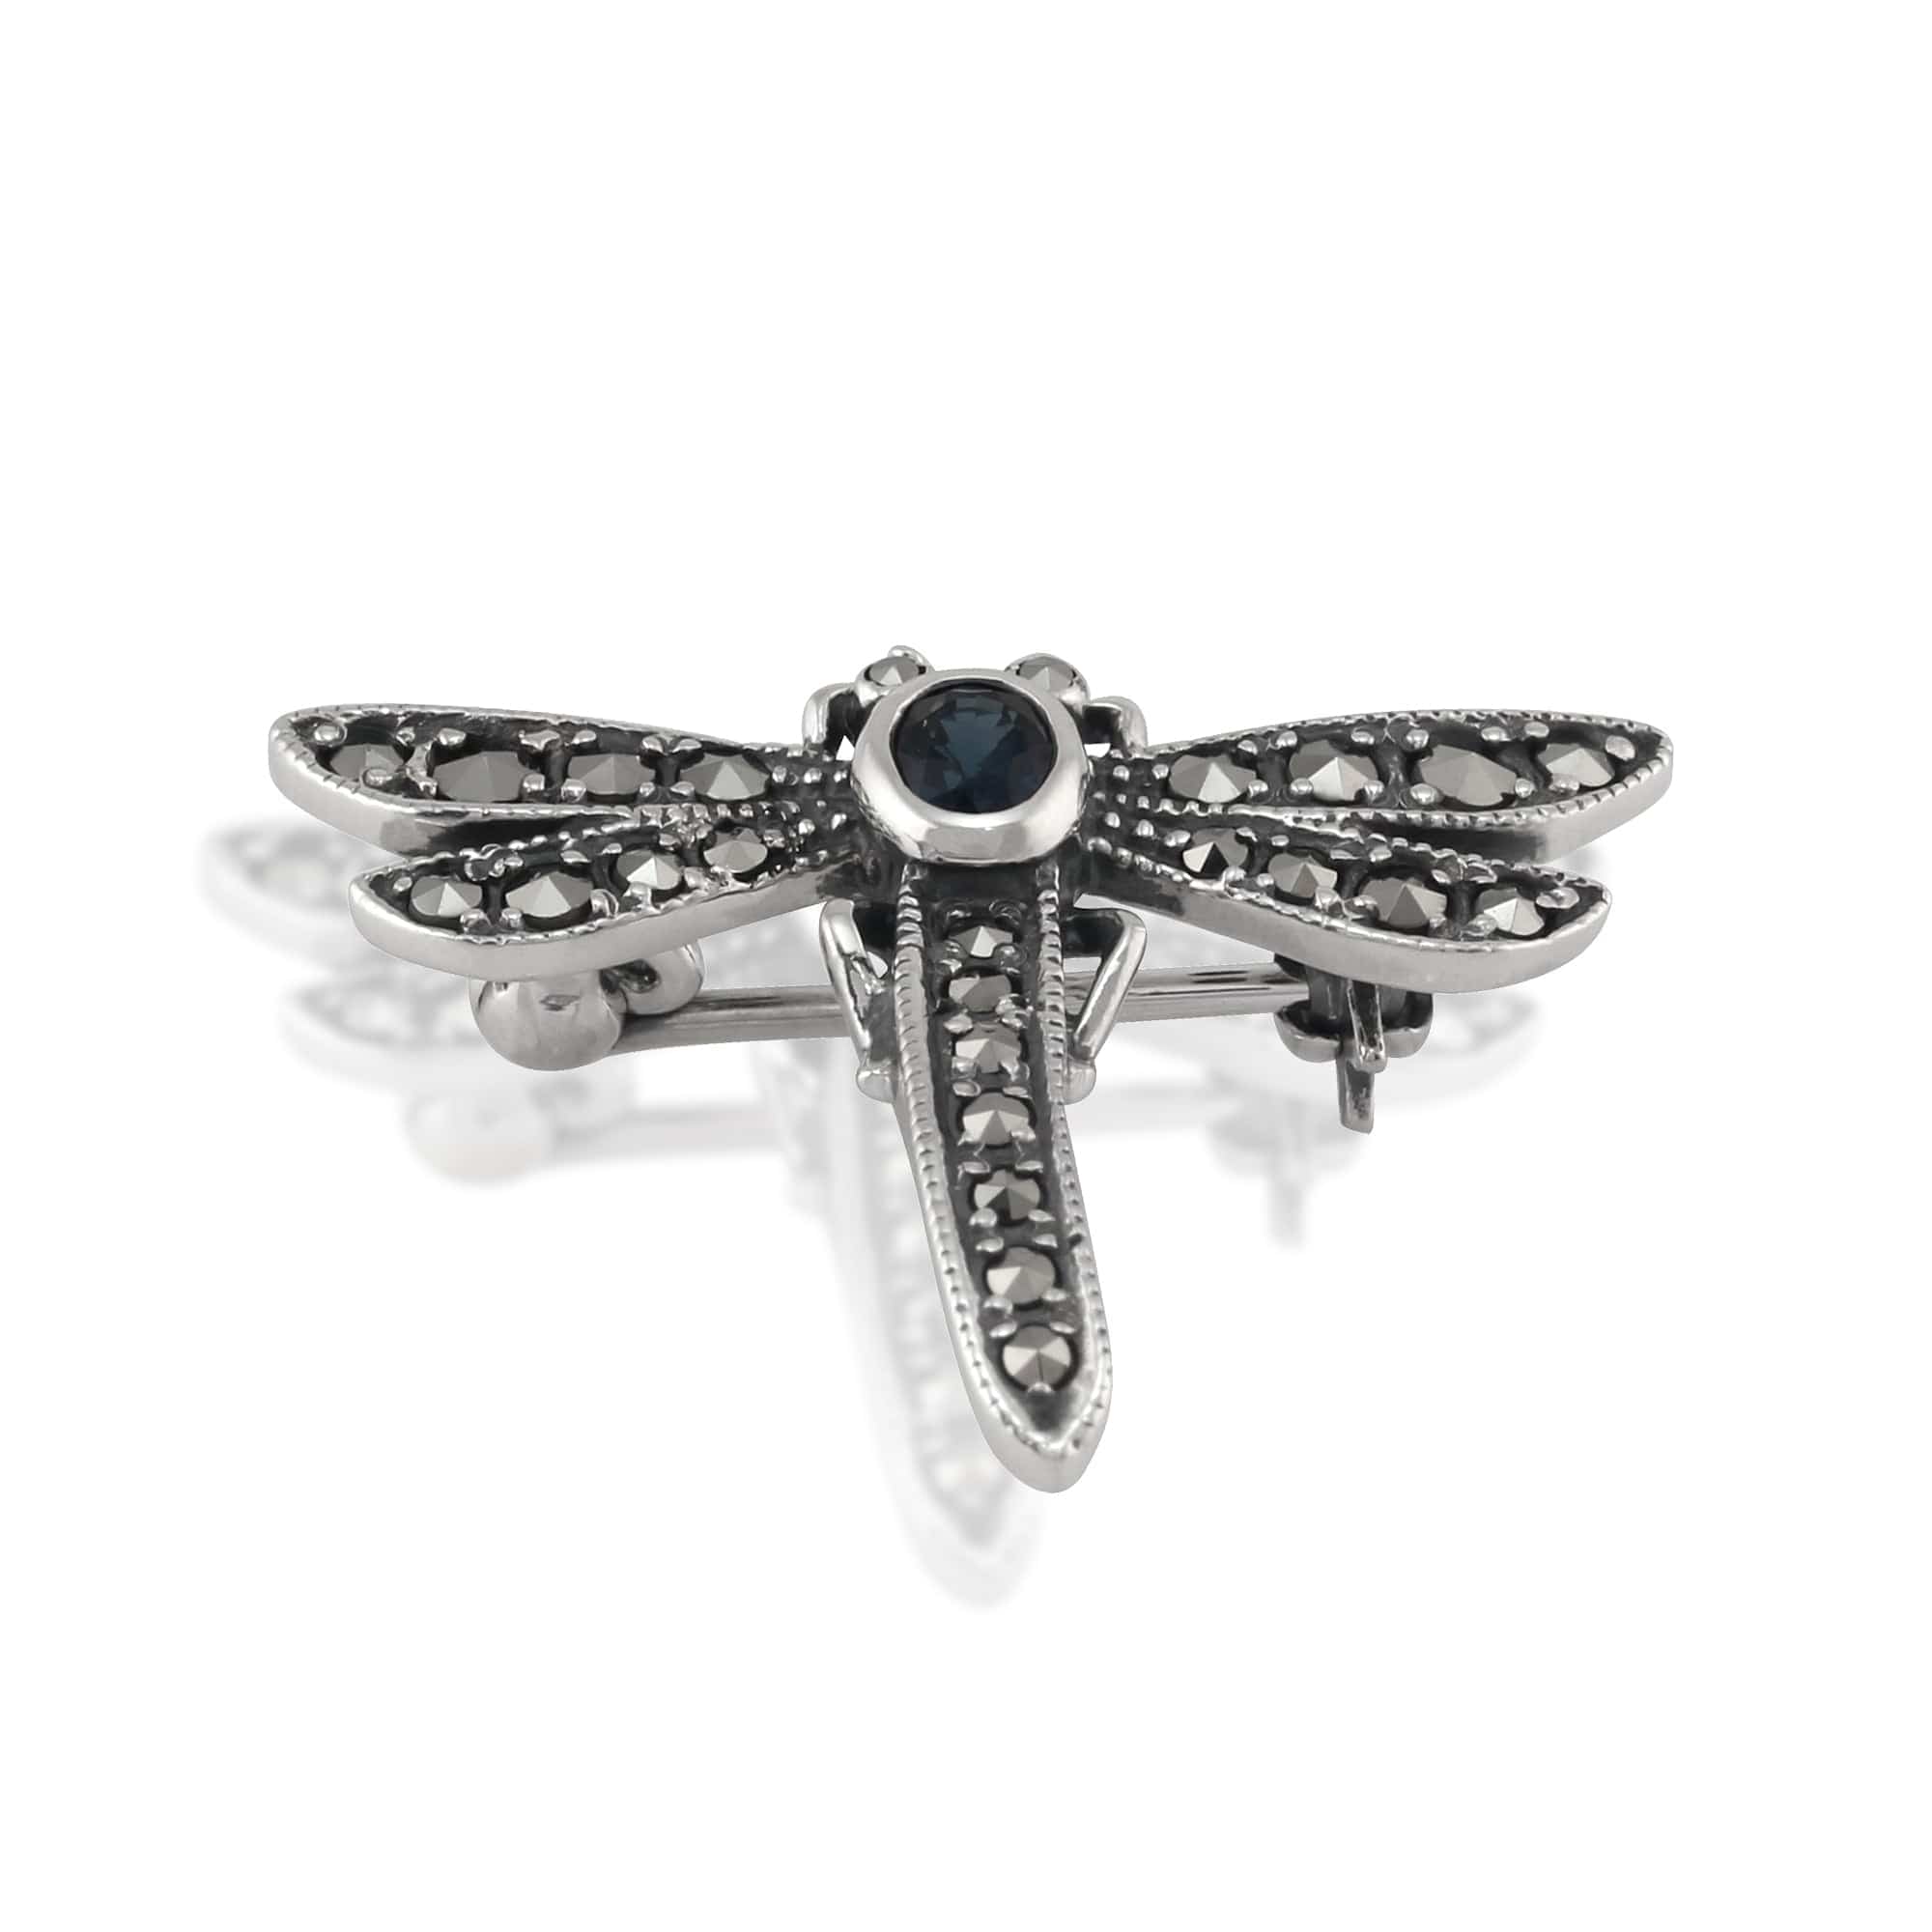 21881 Art Nouveau Style Oval Marcasite & Sapphire Dragonfly Brooch in 925 Sterling Silver 2